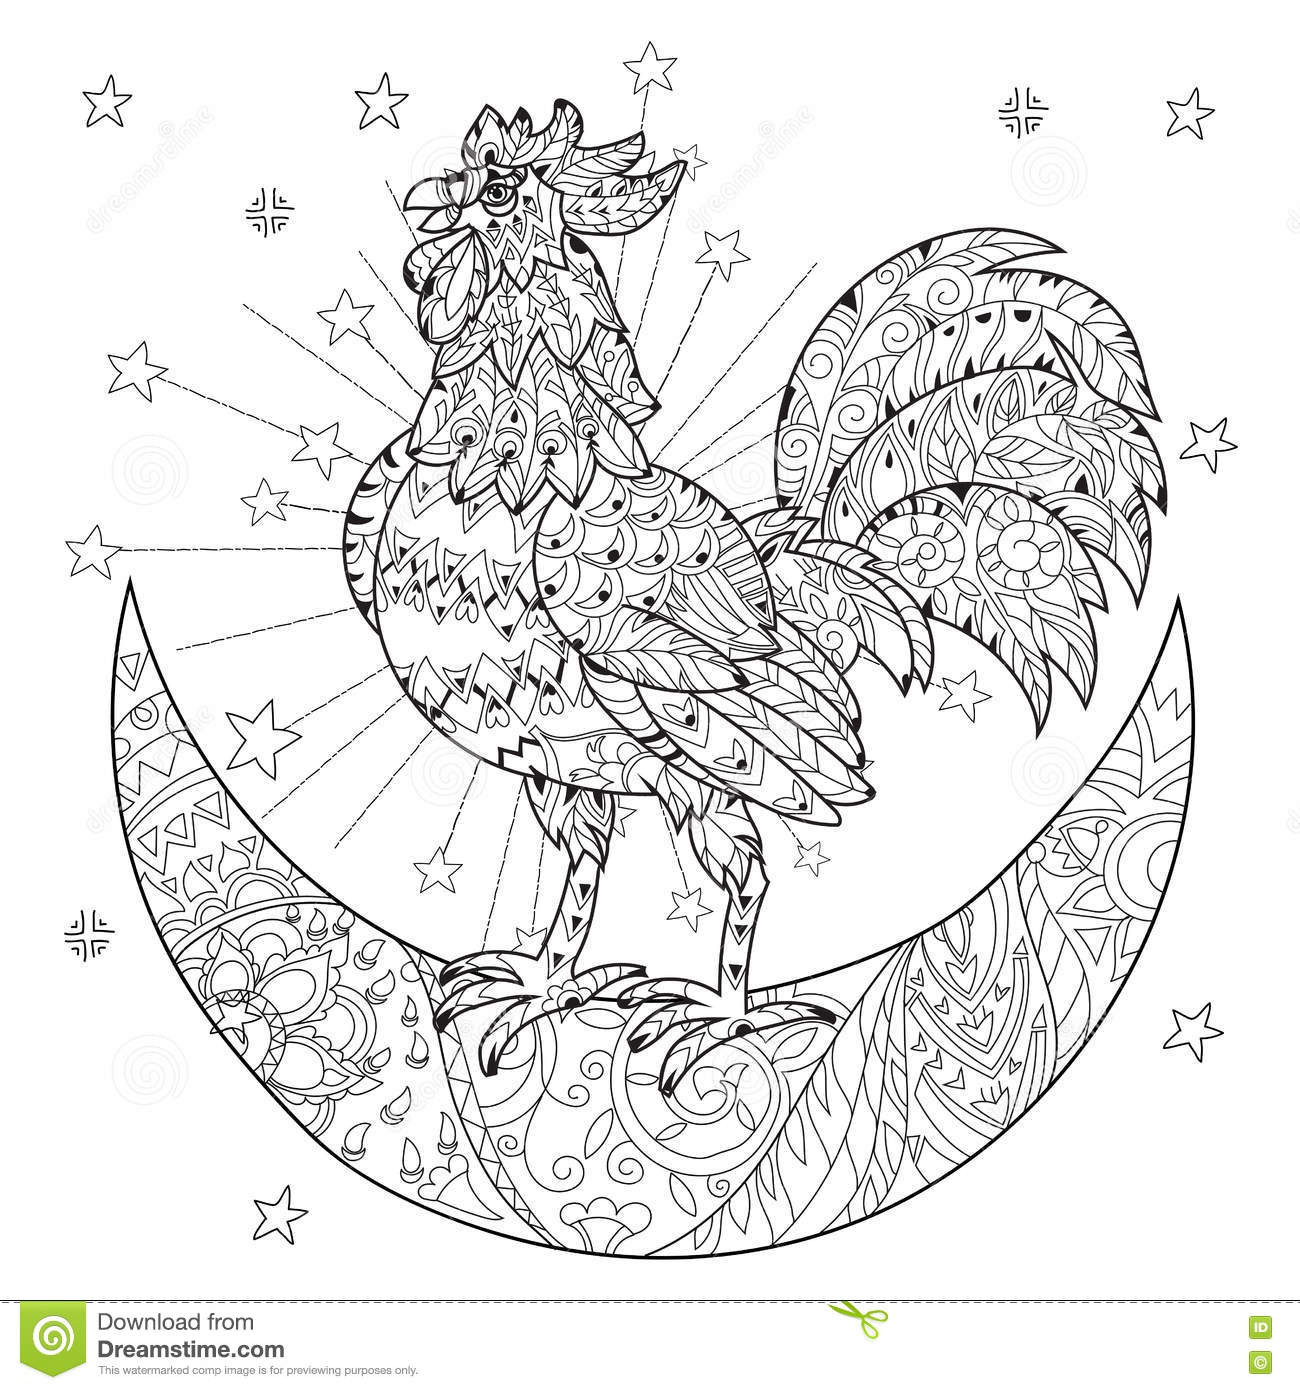 Chicken Coloring Pages For Adults
 Cute Cock Rooster Christmas Half Moon Stock Vector